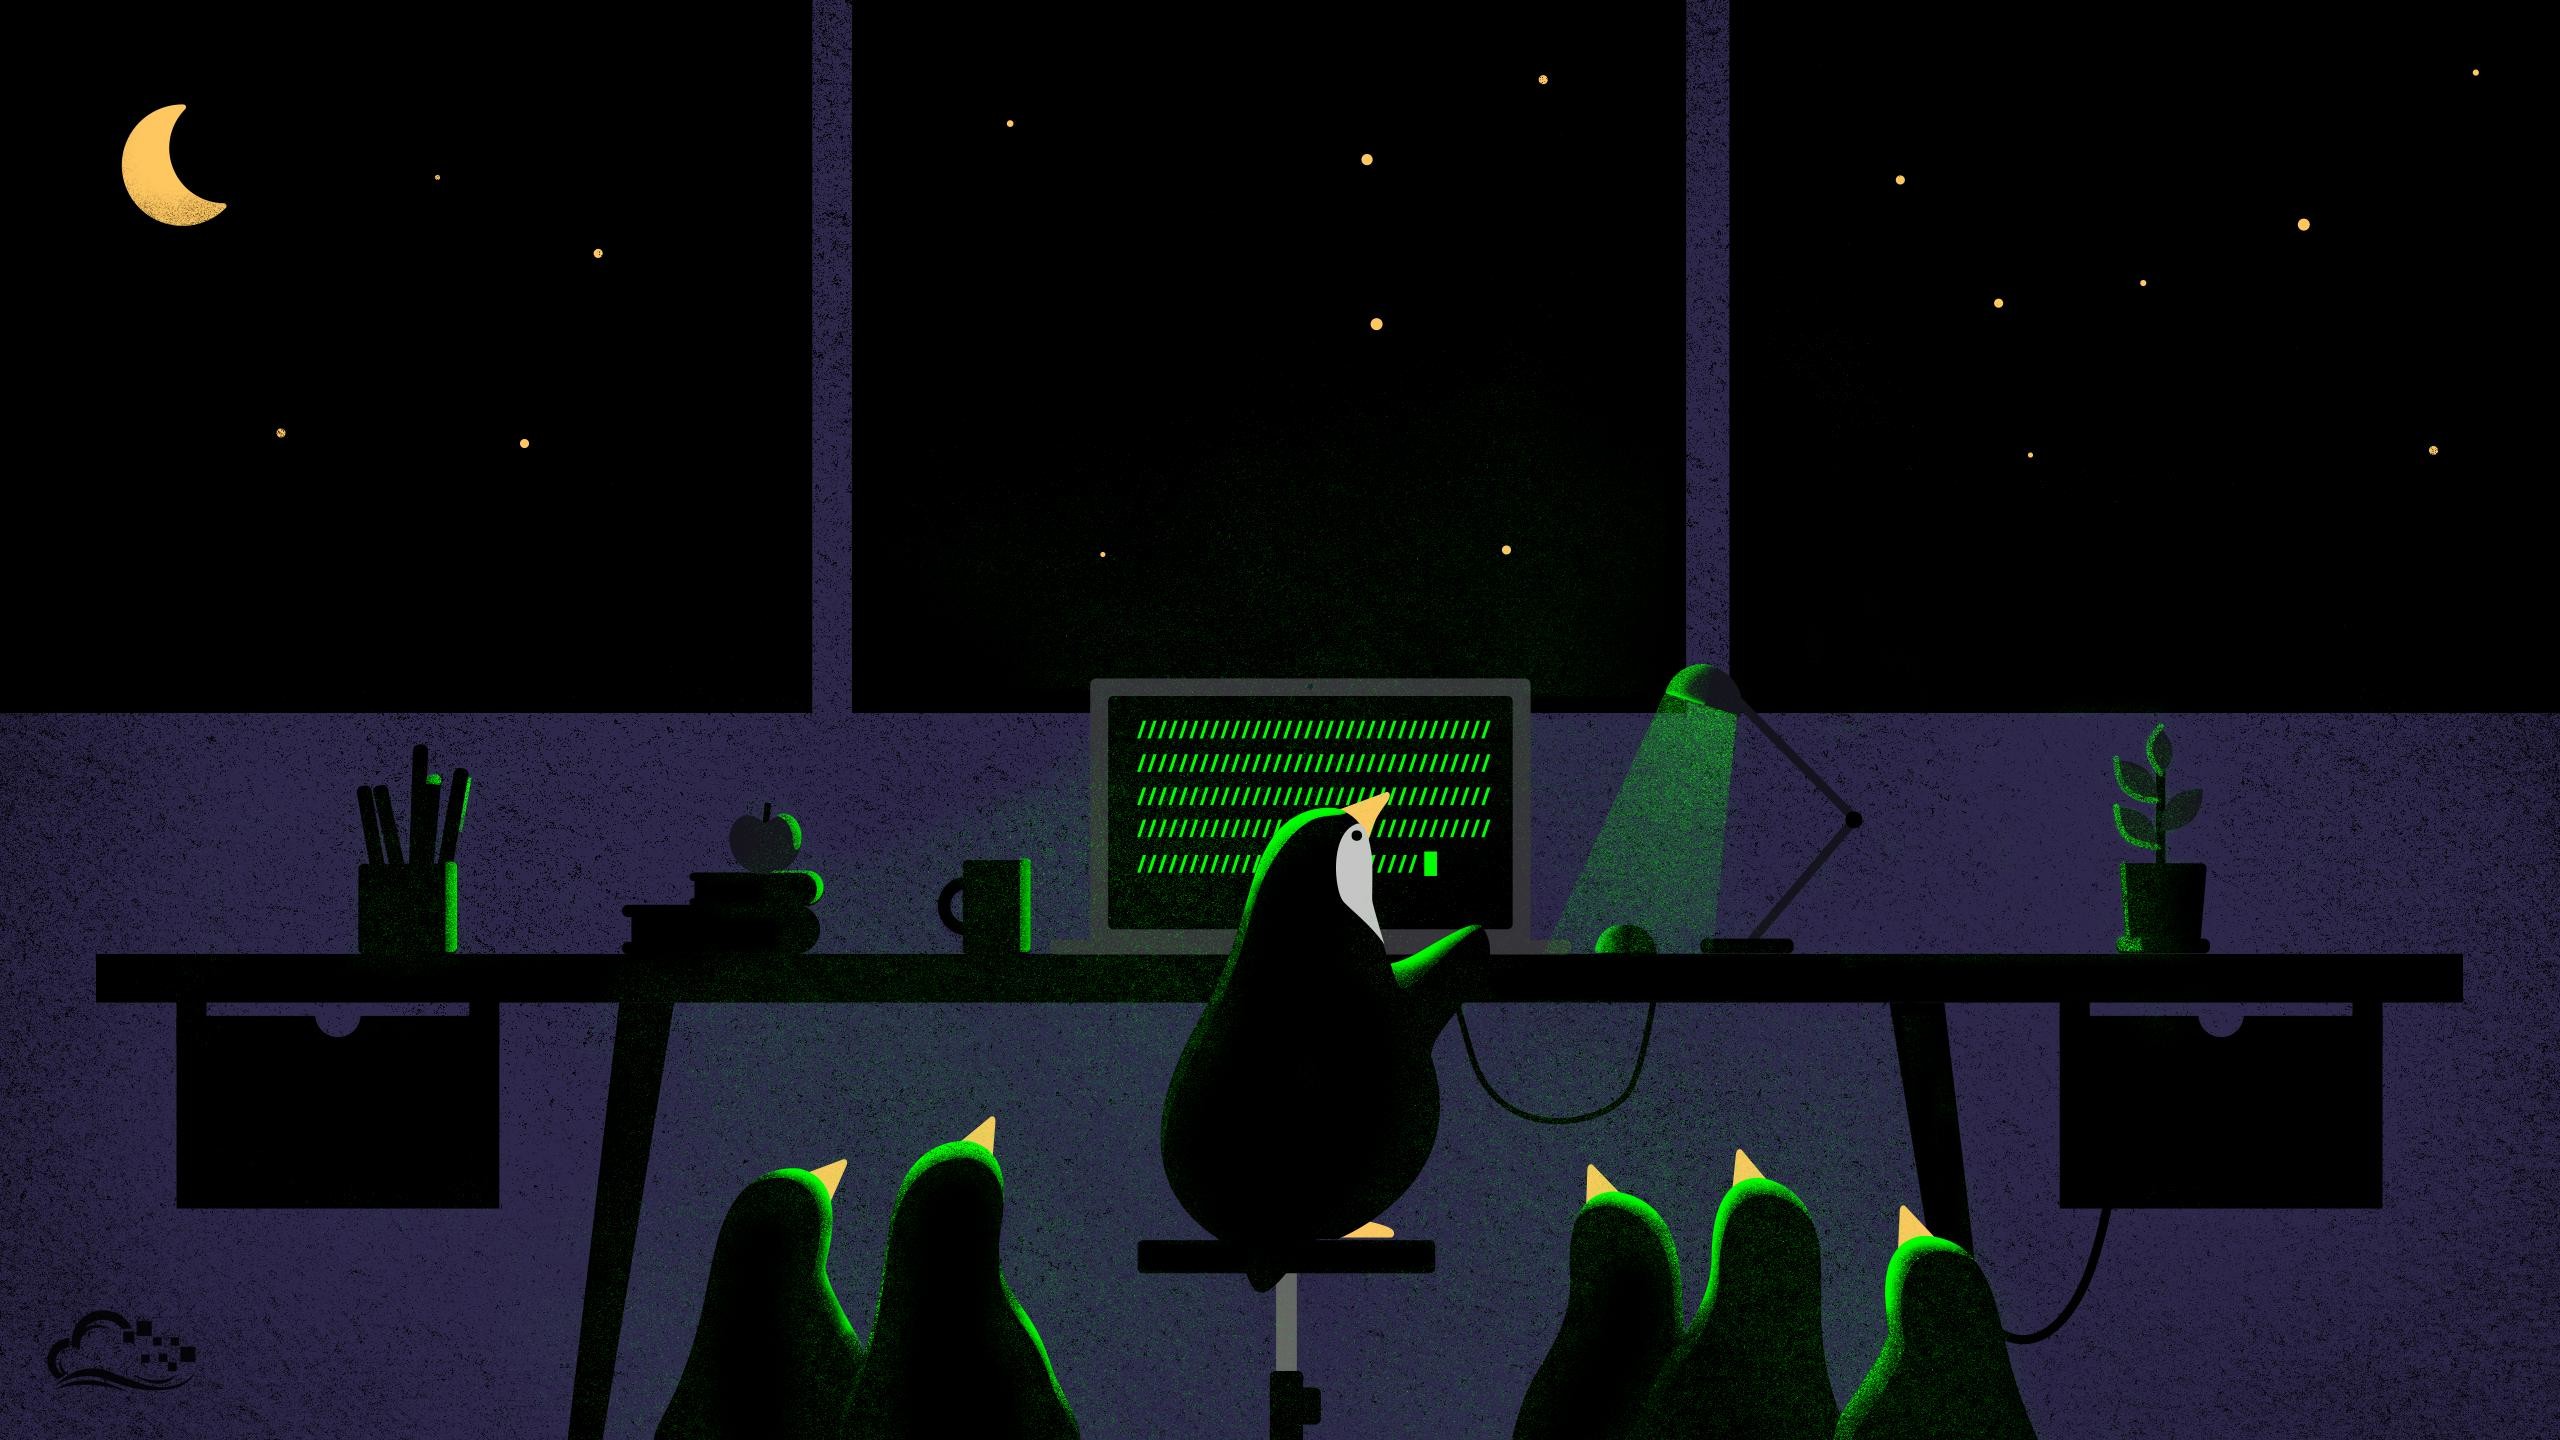 2560x1440 Awwh, This Linux Wallpaper Is Adorable